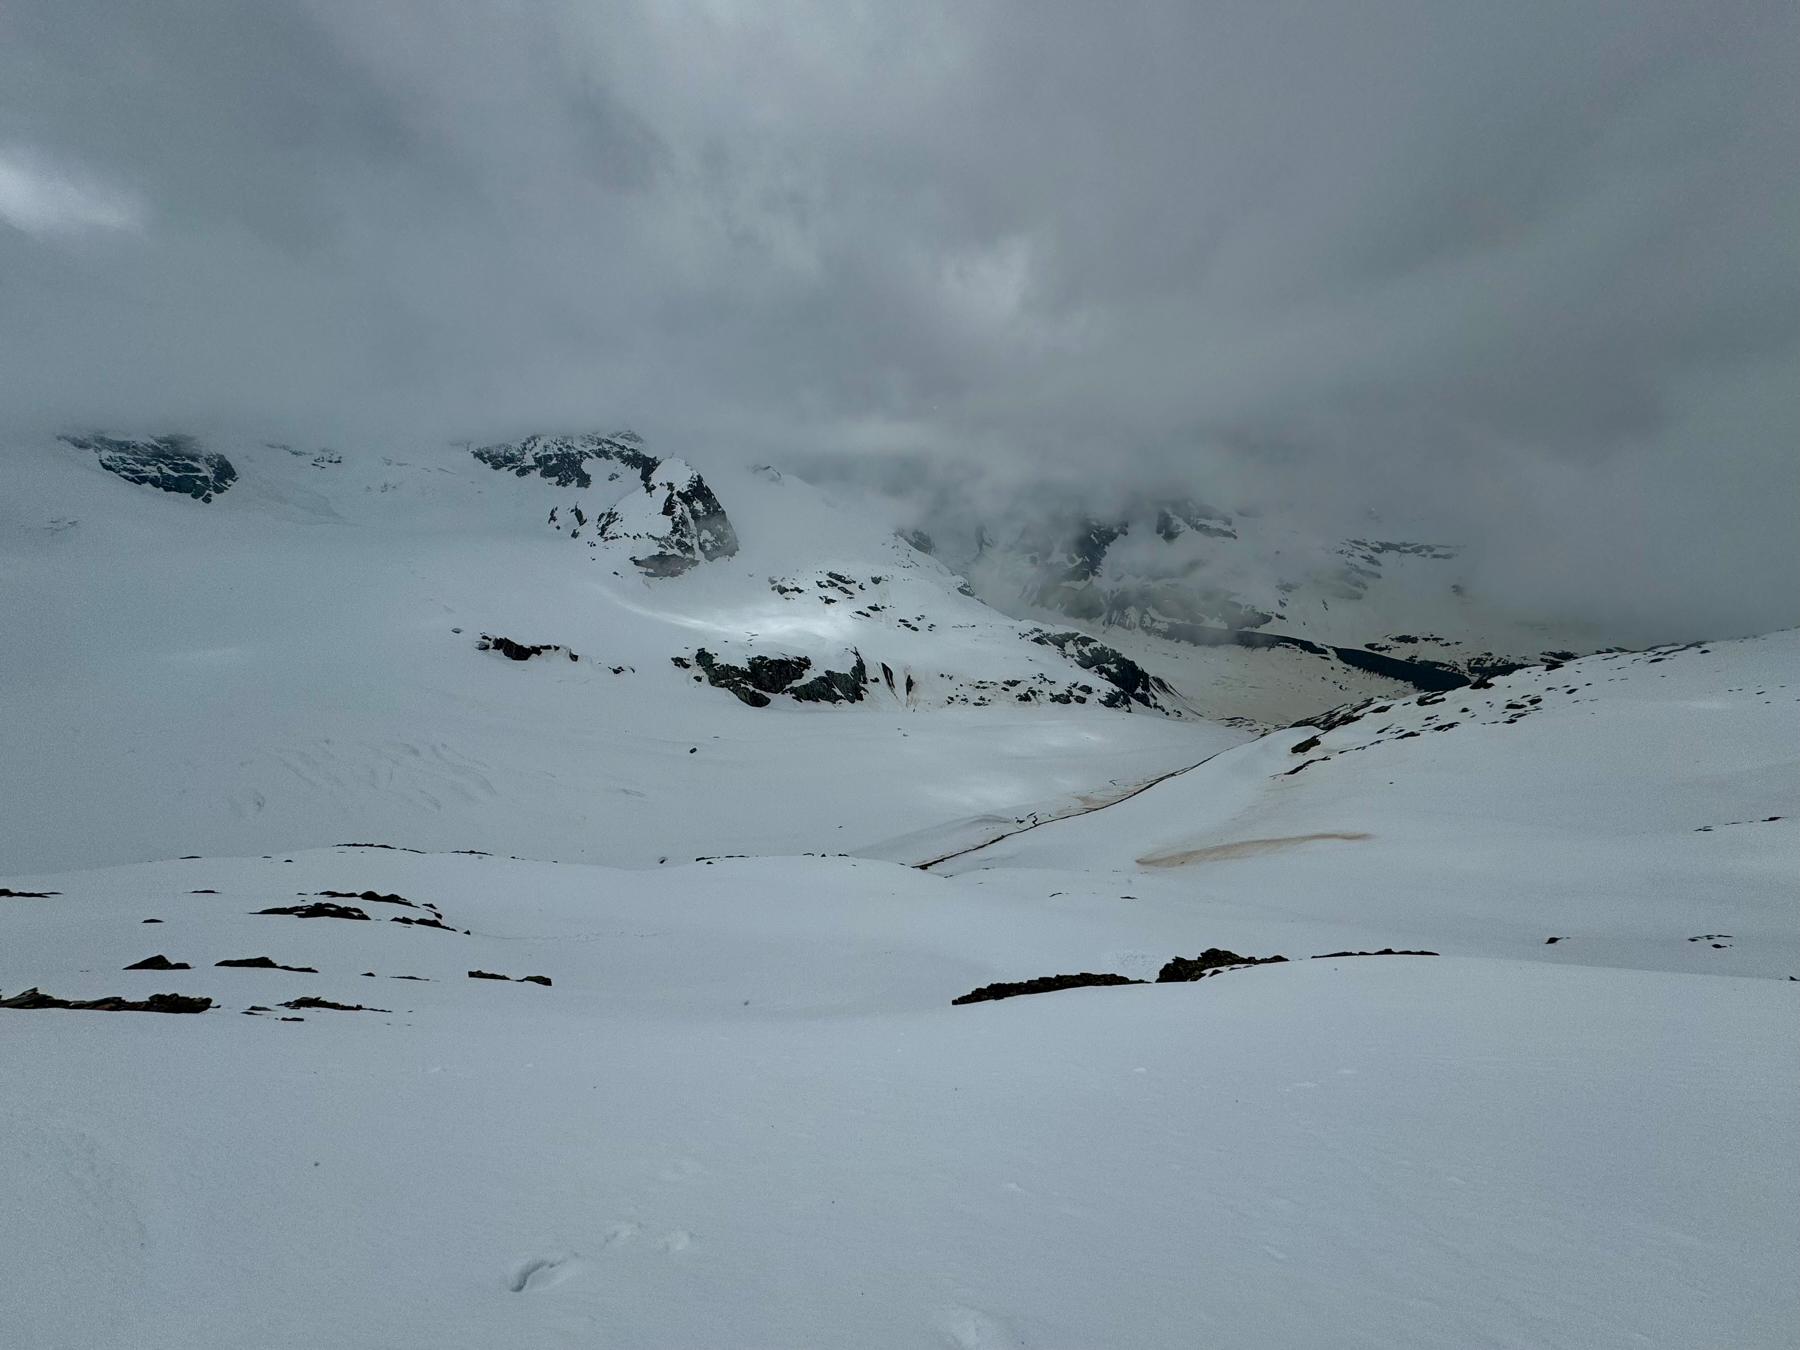 Snow-covered mountain landscape with overcast skies.